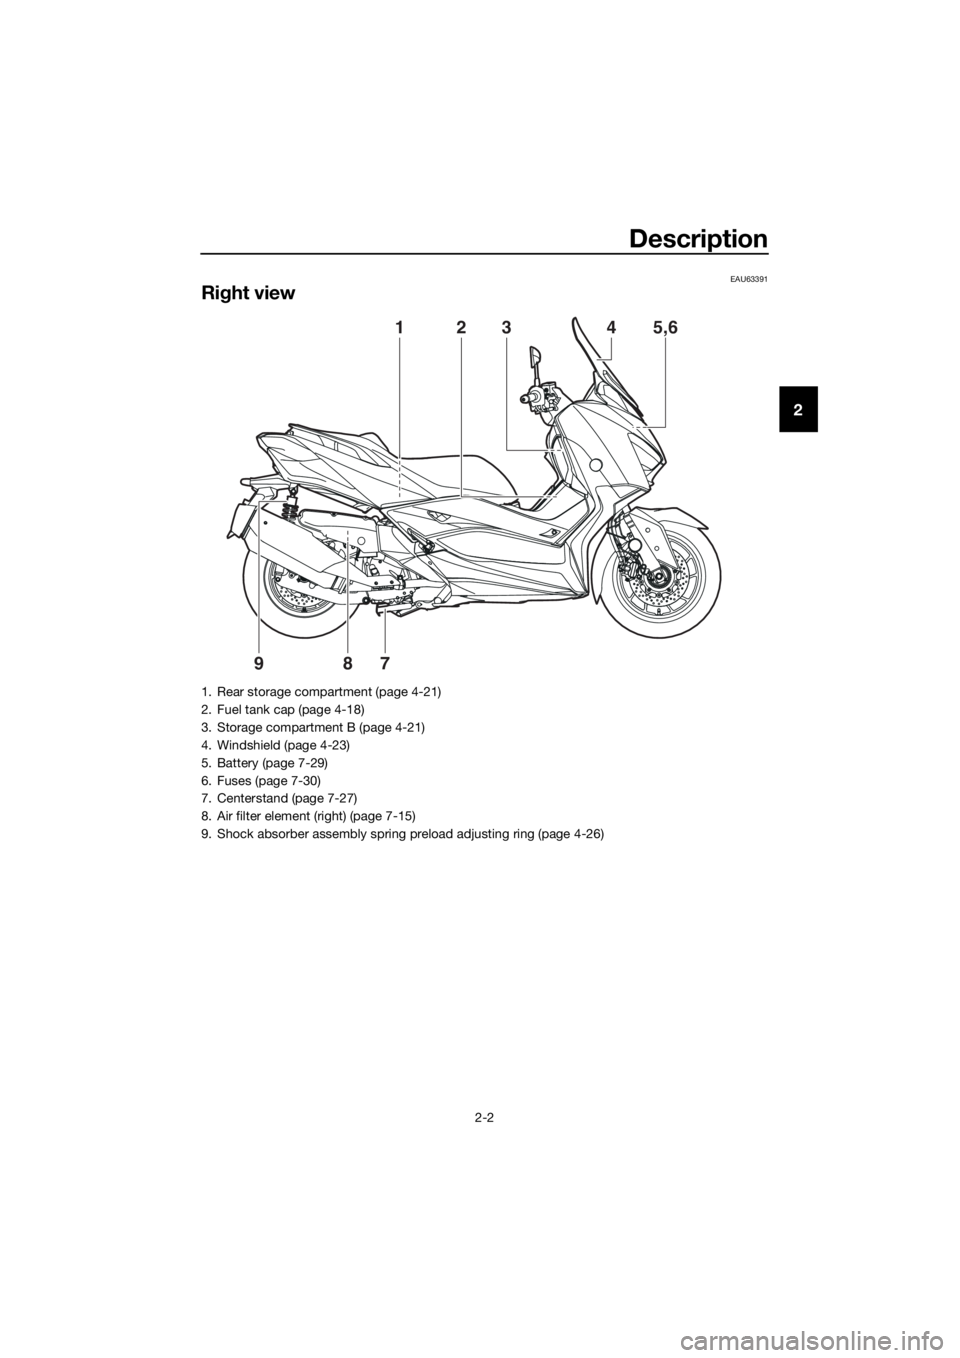 YAMAHA XMAX 400 2020  Owners Manual Description
2-2
2
EAU63391
Right view
2345,61
987
1. Rear storage compartment (page 4-21)
2. Fuel tank cap (page 4-18)
3. Storage compartment B (page 4-21)
4. Windshield (page 4-23)
5. Battery (page 7